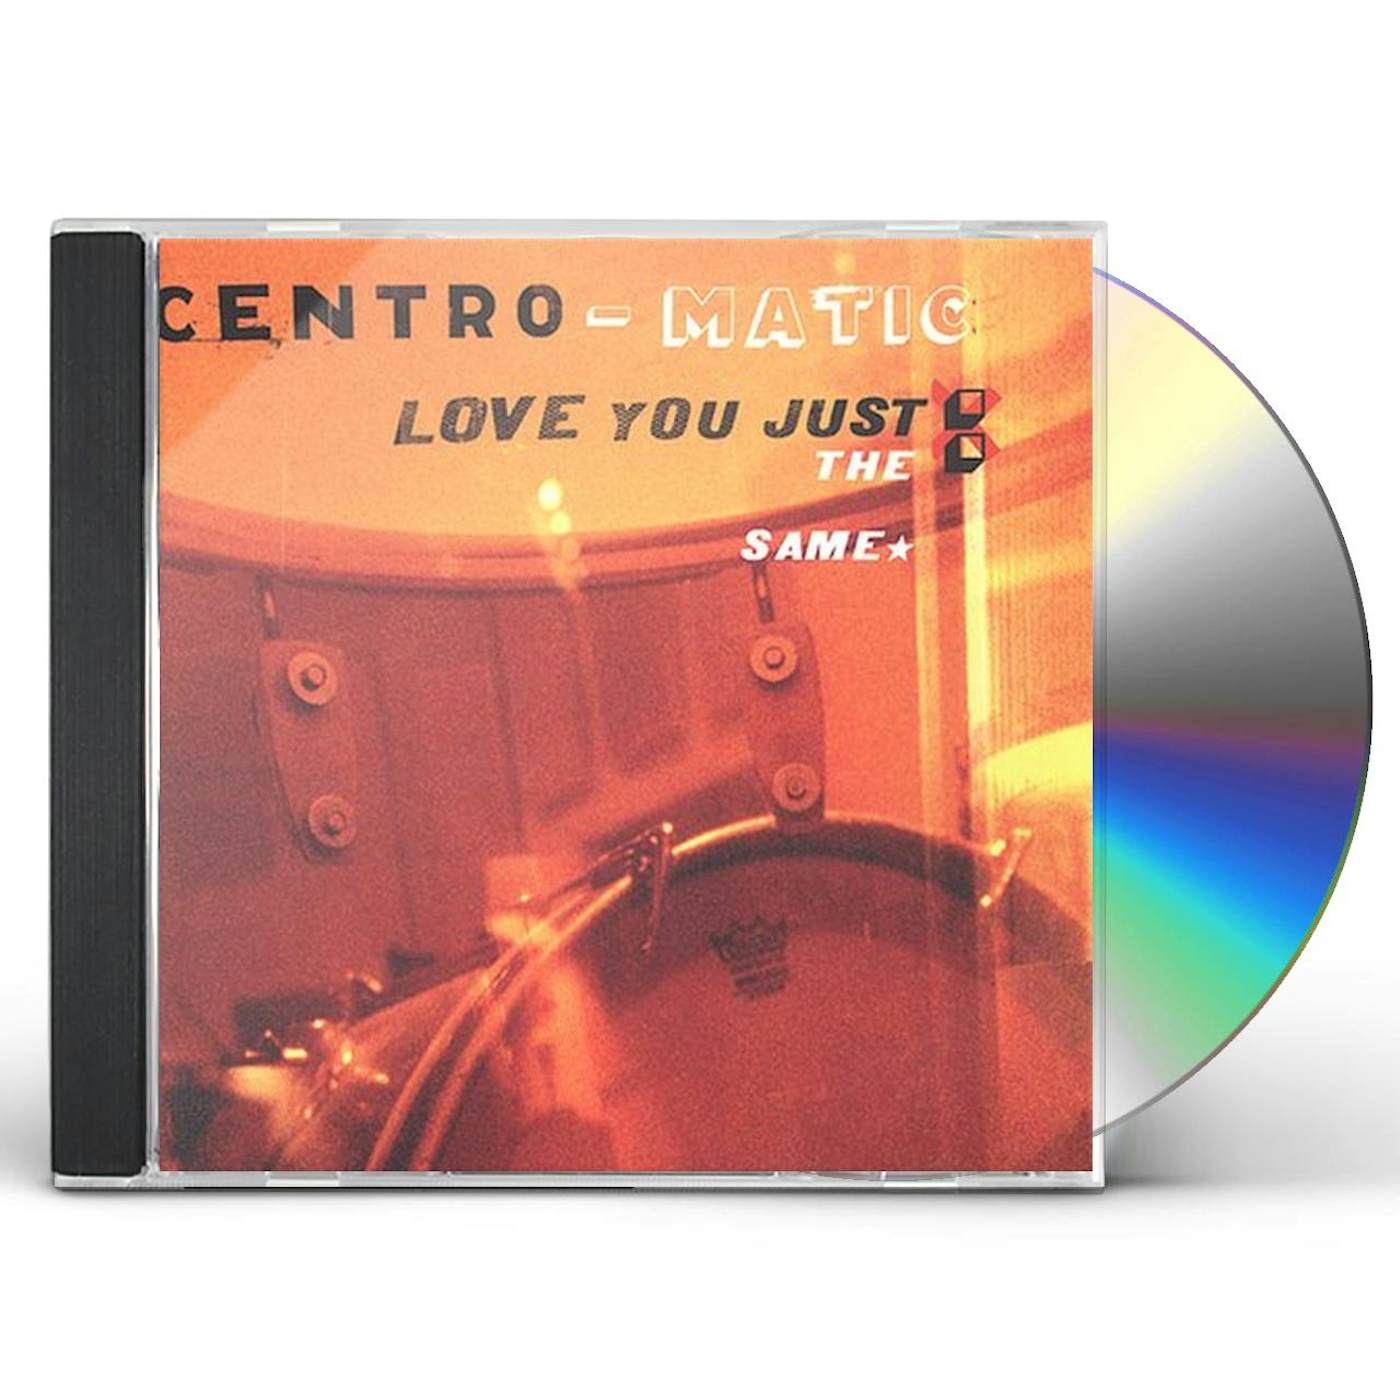 Centro-matic LOVE YOU JUST THE SAME CD